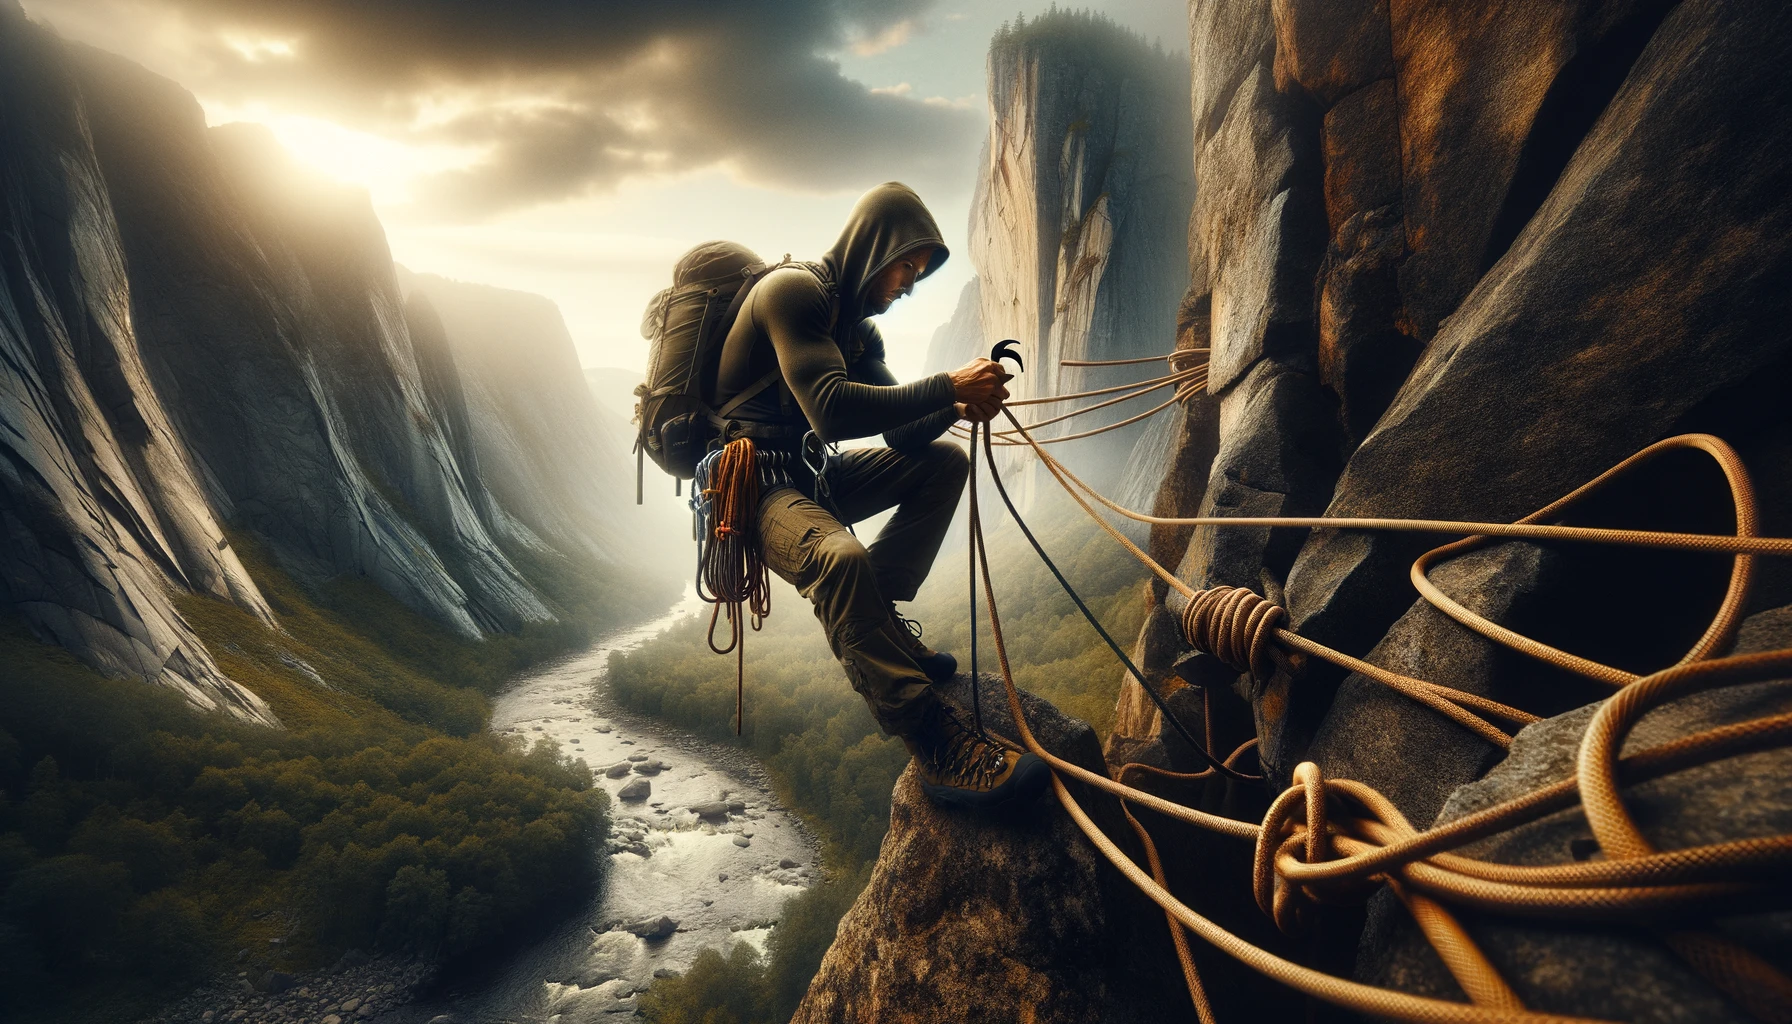 A climber uses a Prusik knot for safety and mobility in a dramatic wilderness setting, appealing to preppers and outdoor enthusiasts